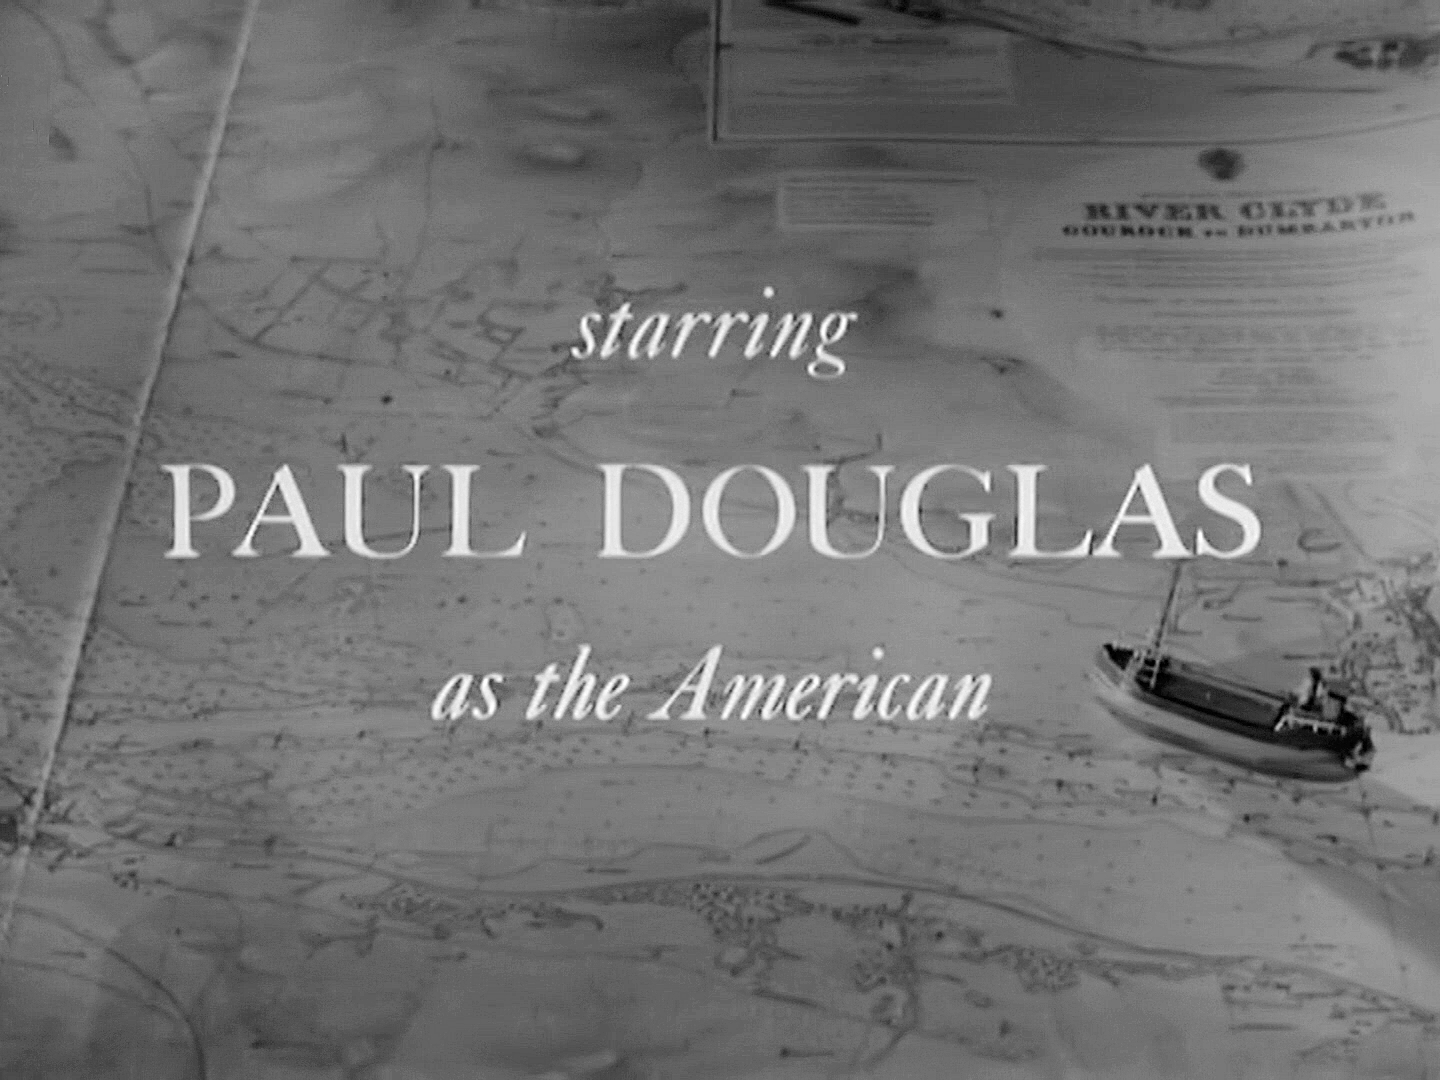 Main title from The Maggie (1954) (5). Starring Paul Douglas as the American